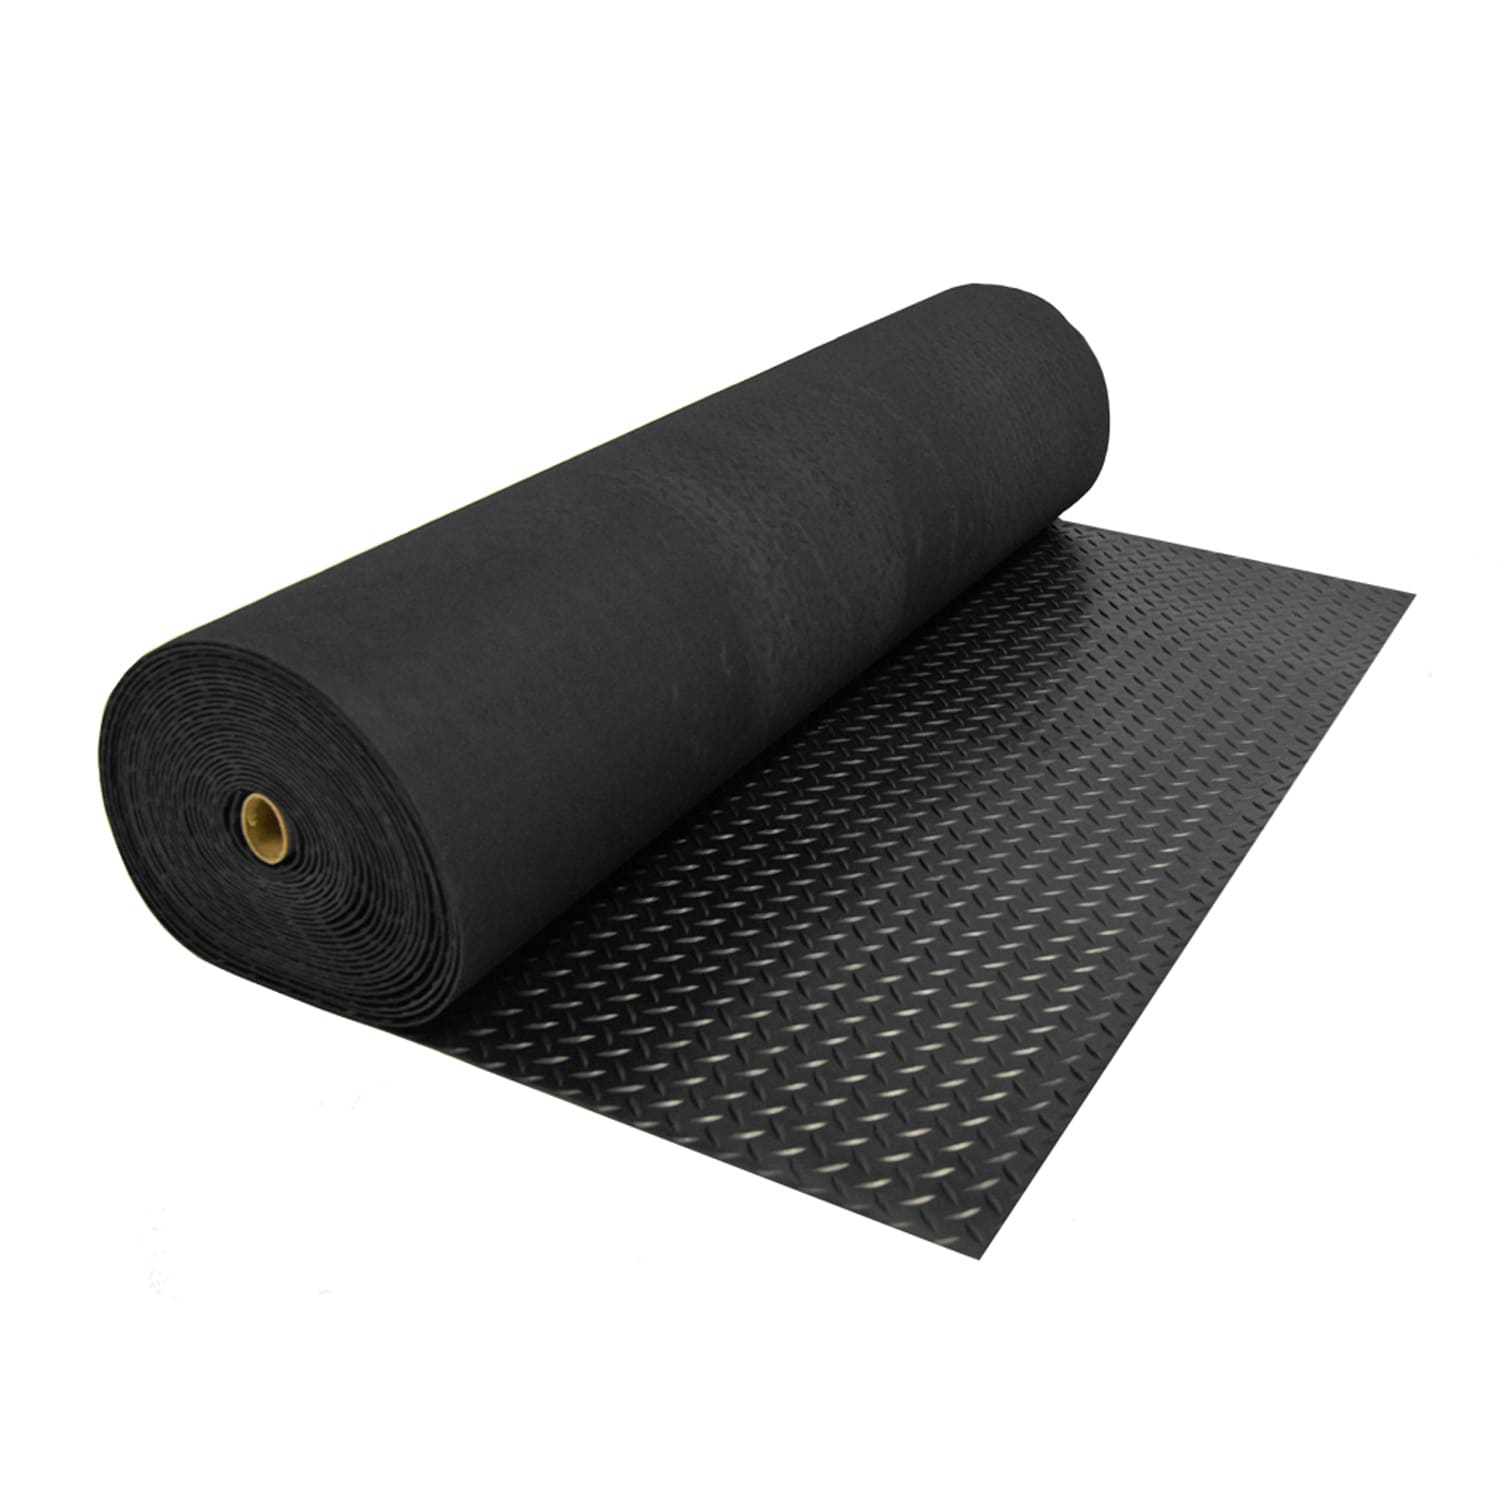 8mm Rubber Roll Matting is Rubber Flooring for Fitness by American